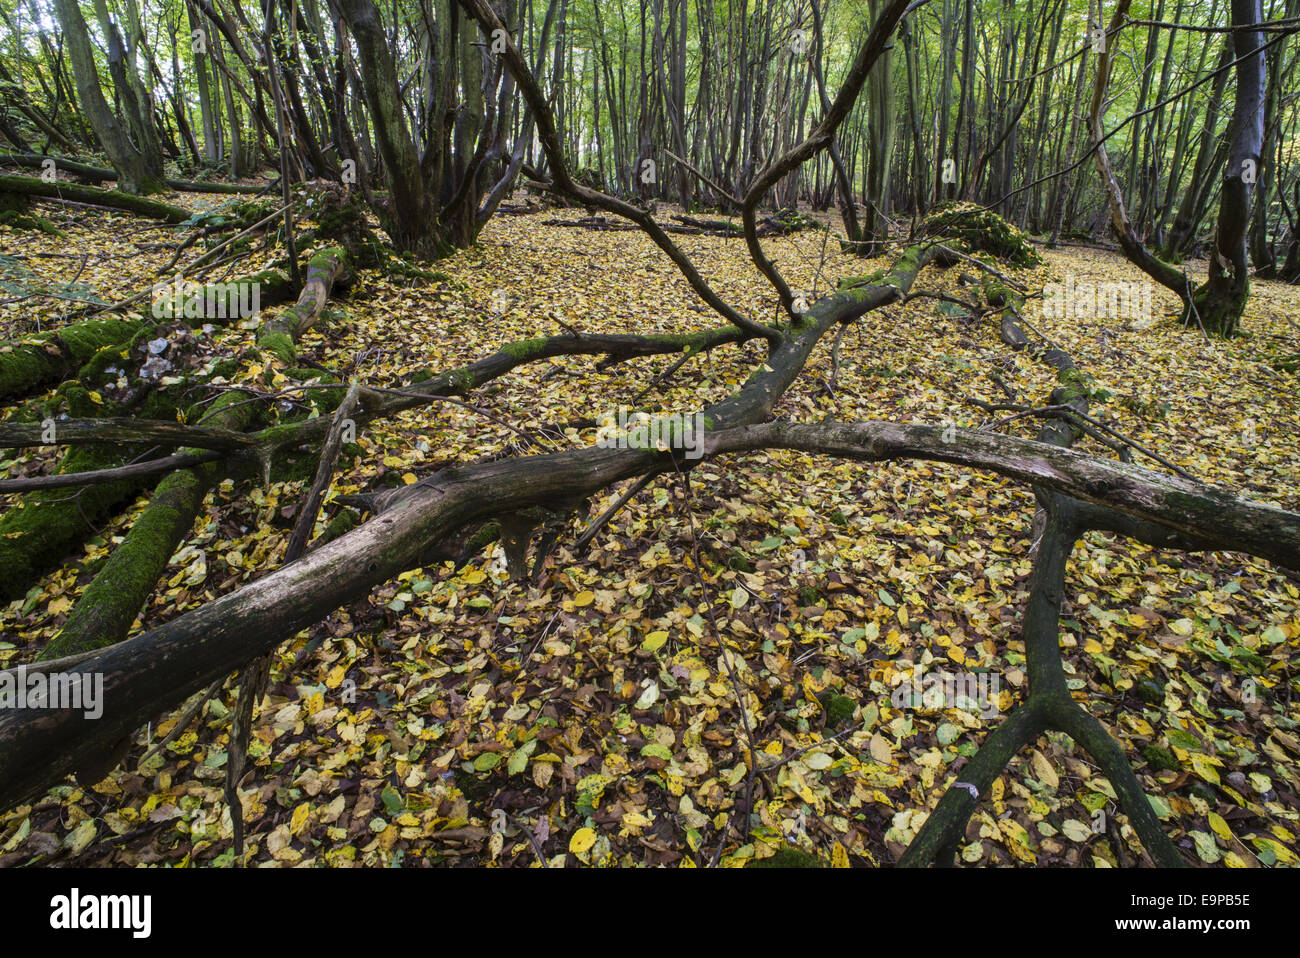 Fallen tree branches and leaf litter on floor of coppice woodland habitat, Kent, England, October Stock Photo